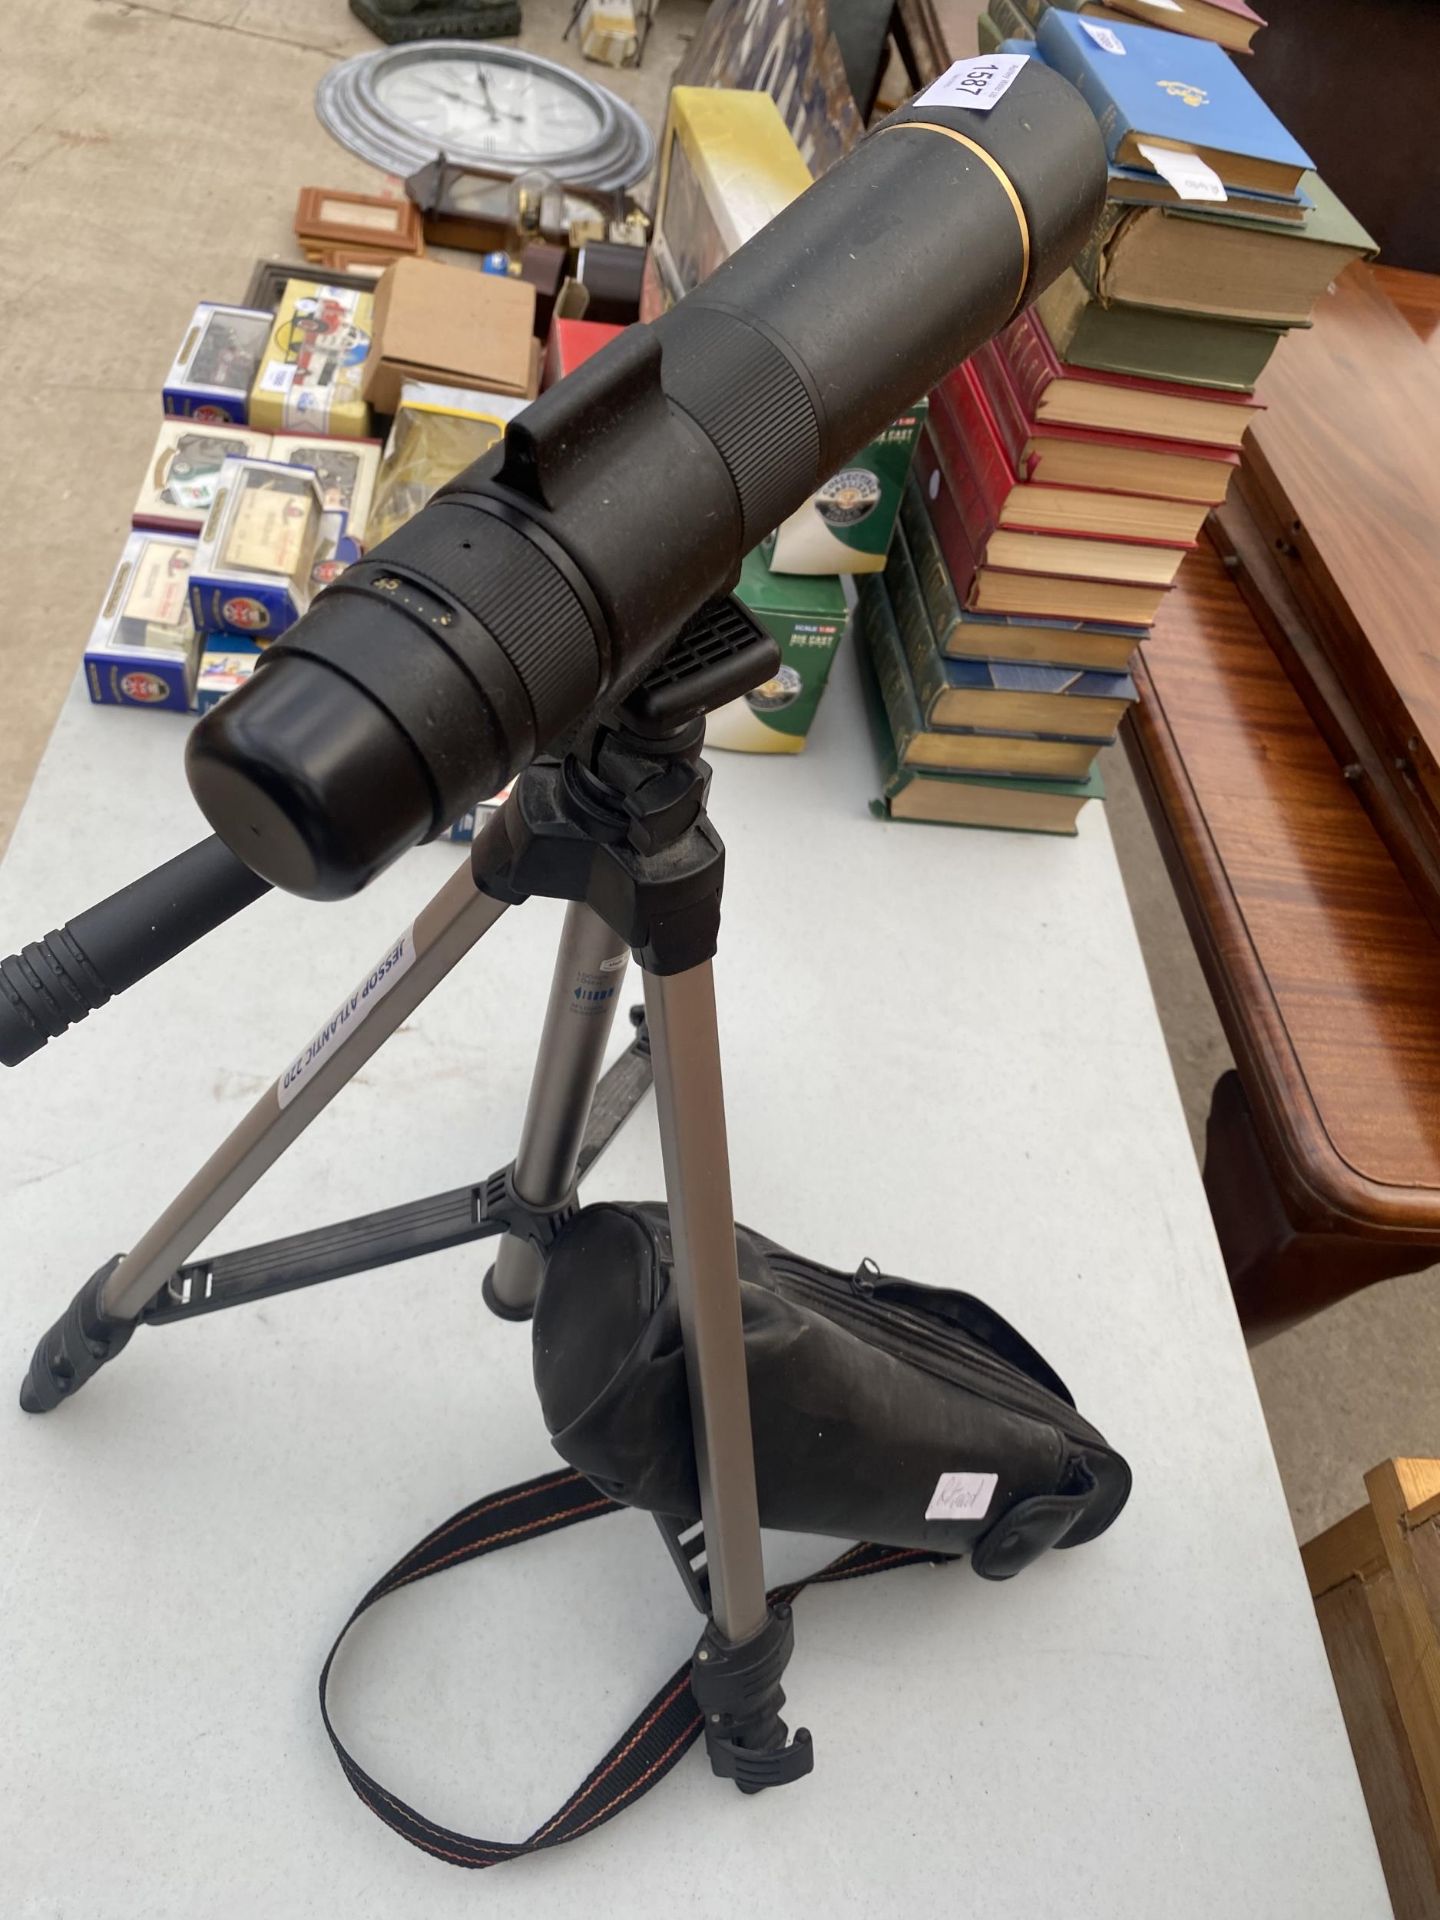 A TELESCOPE AND A JESSOP ATLANTIC 220 TRIPOD STAND - Image 2 of 2